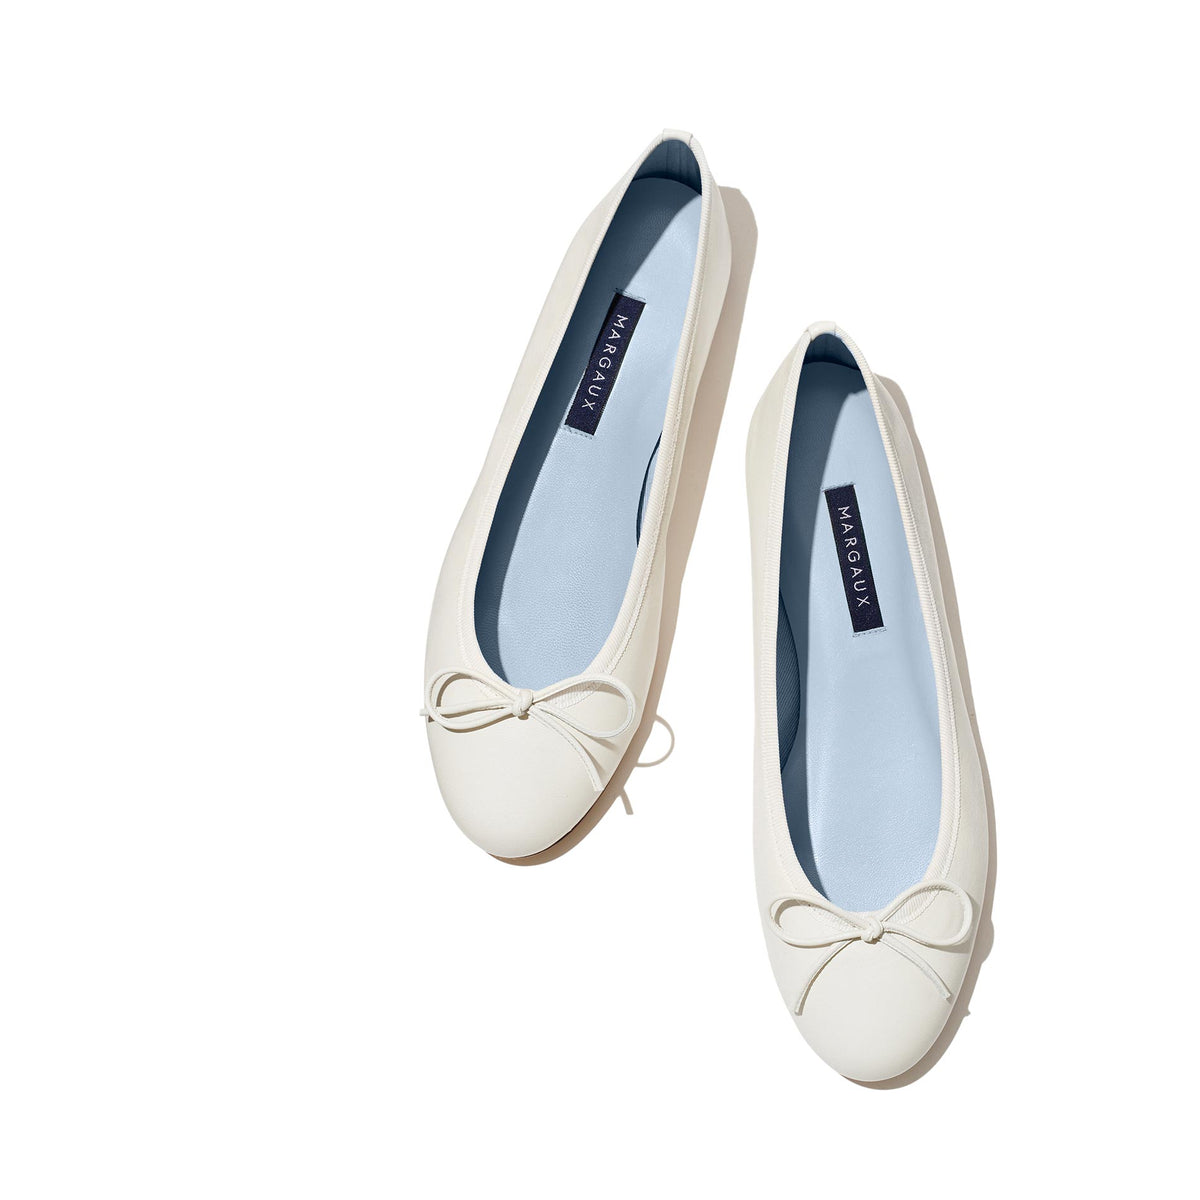 The Demi in Ivory Nappa